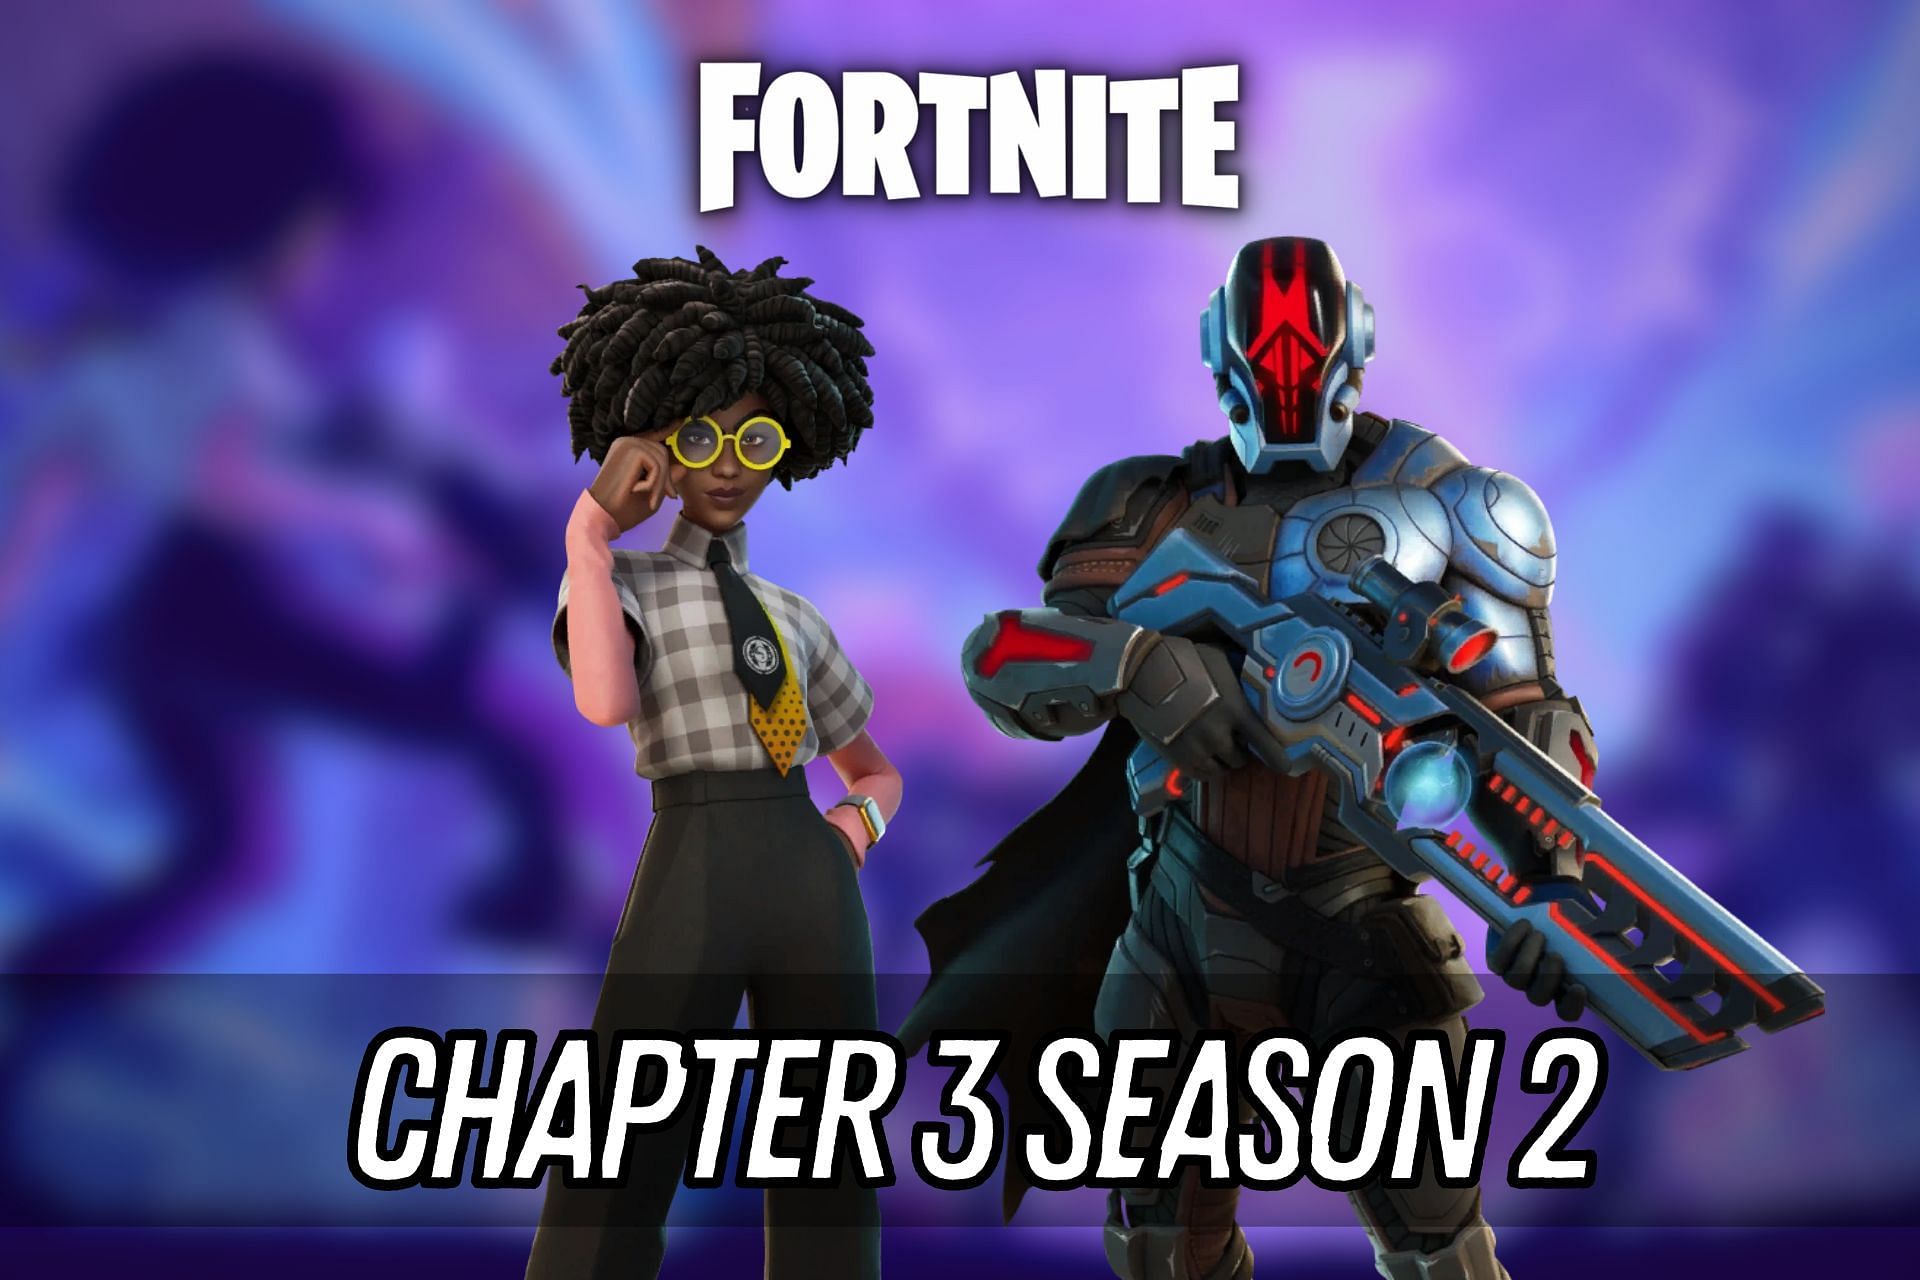 Fortnite Chapter 3 Season 2 is releasing soon, and tons of the upcoming content has been leaked online (Image via Sportskeeda)